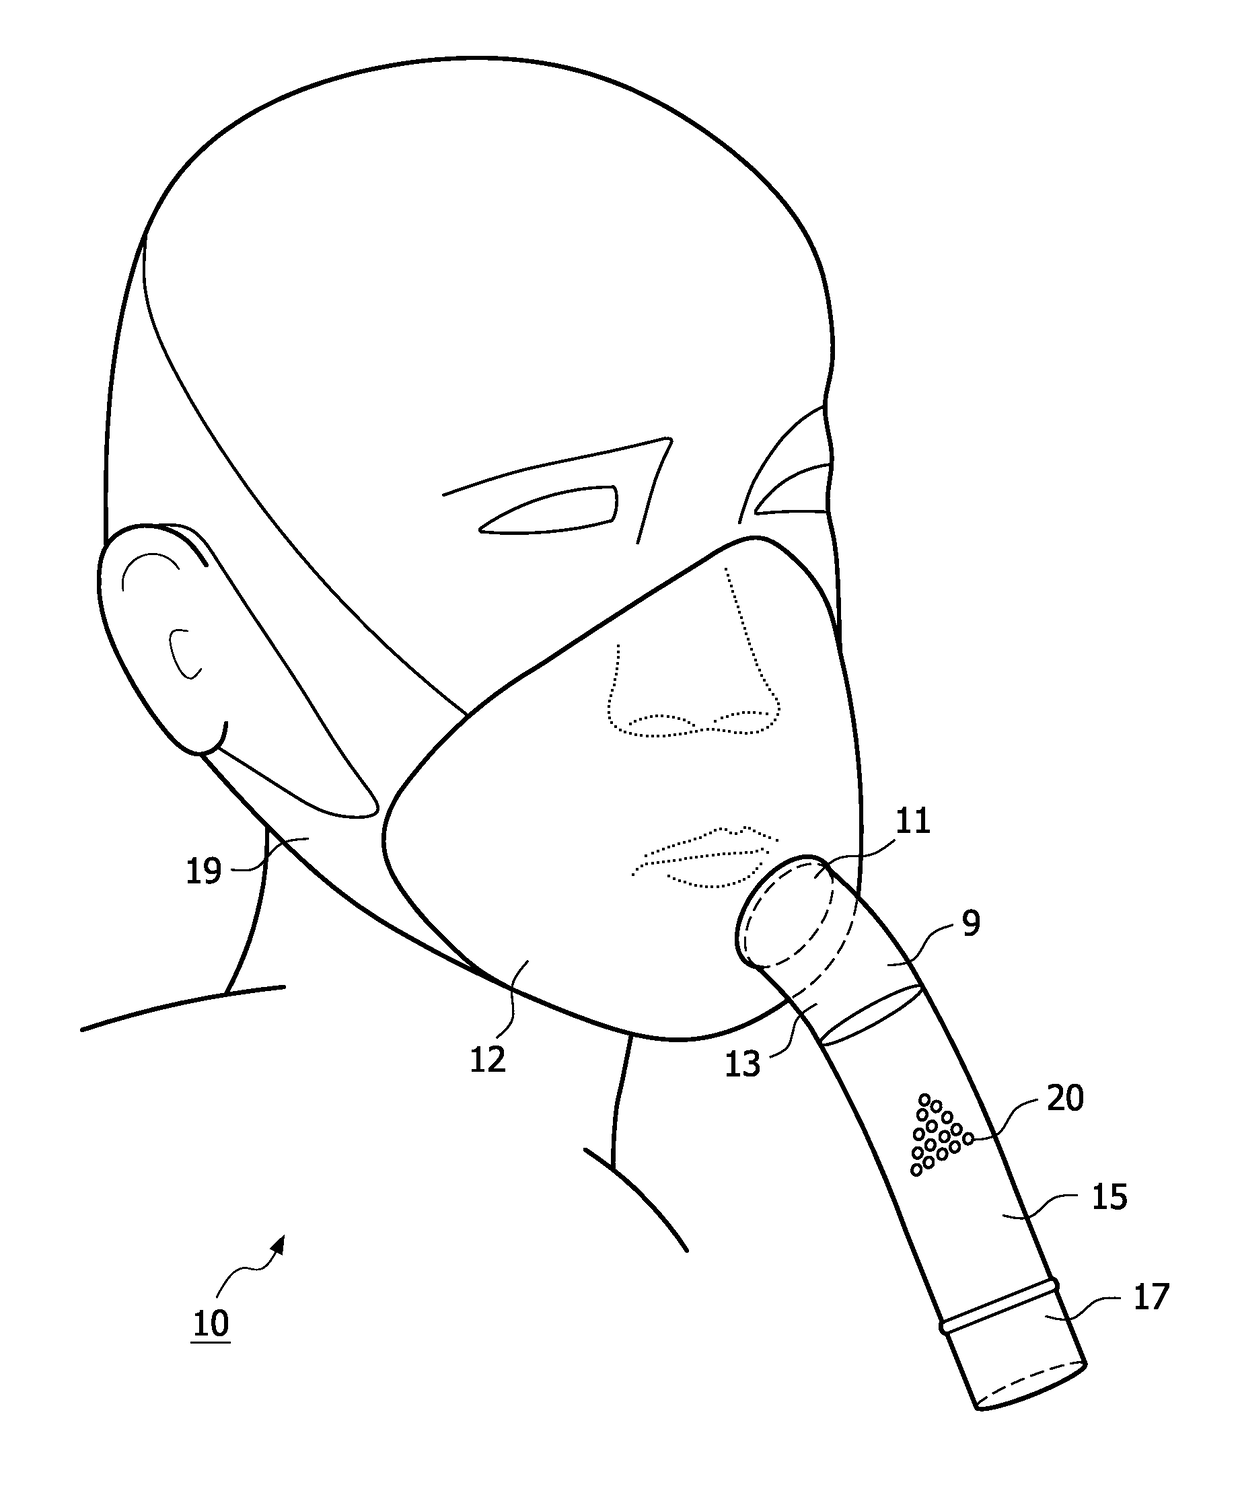 Respiratory interface device with flexible cover